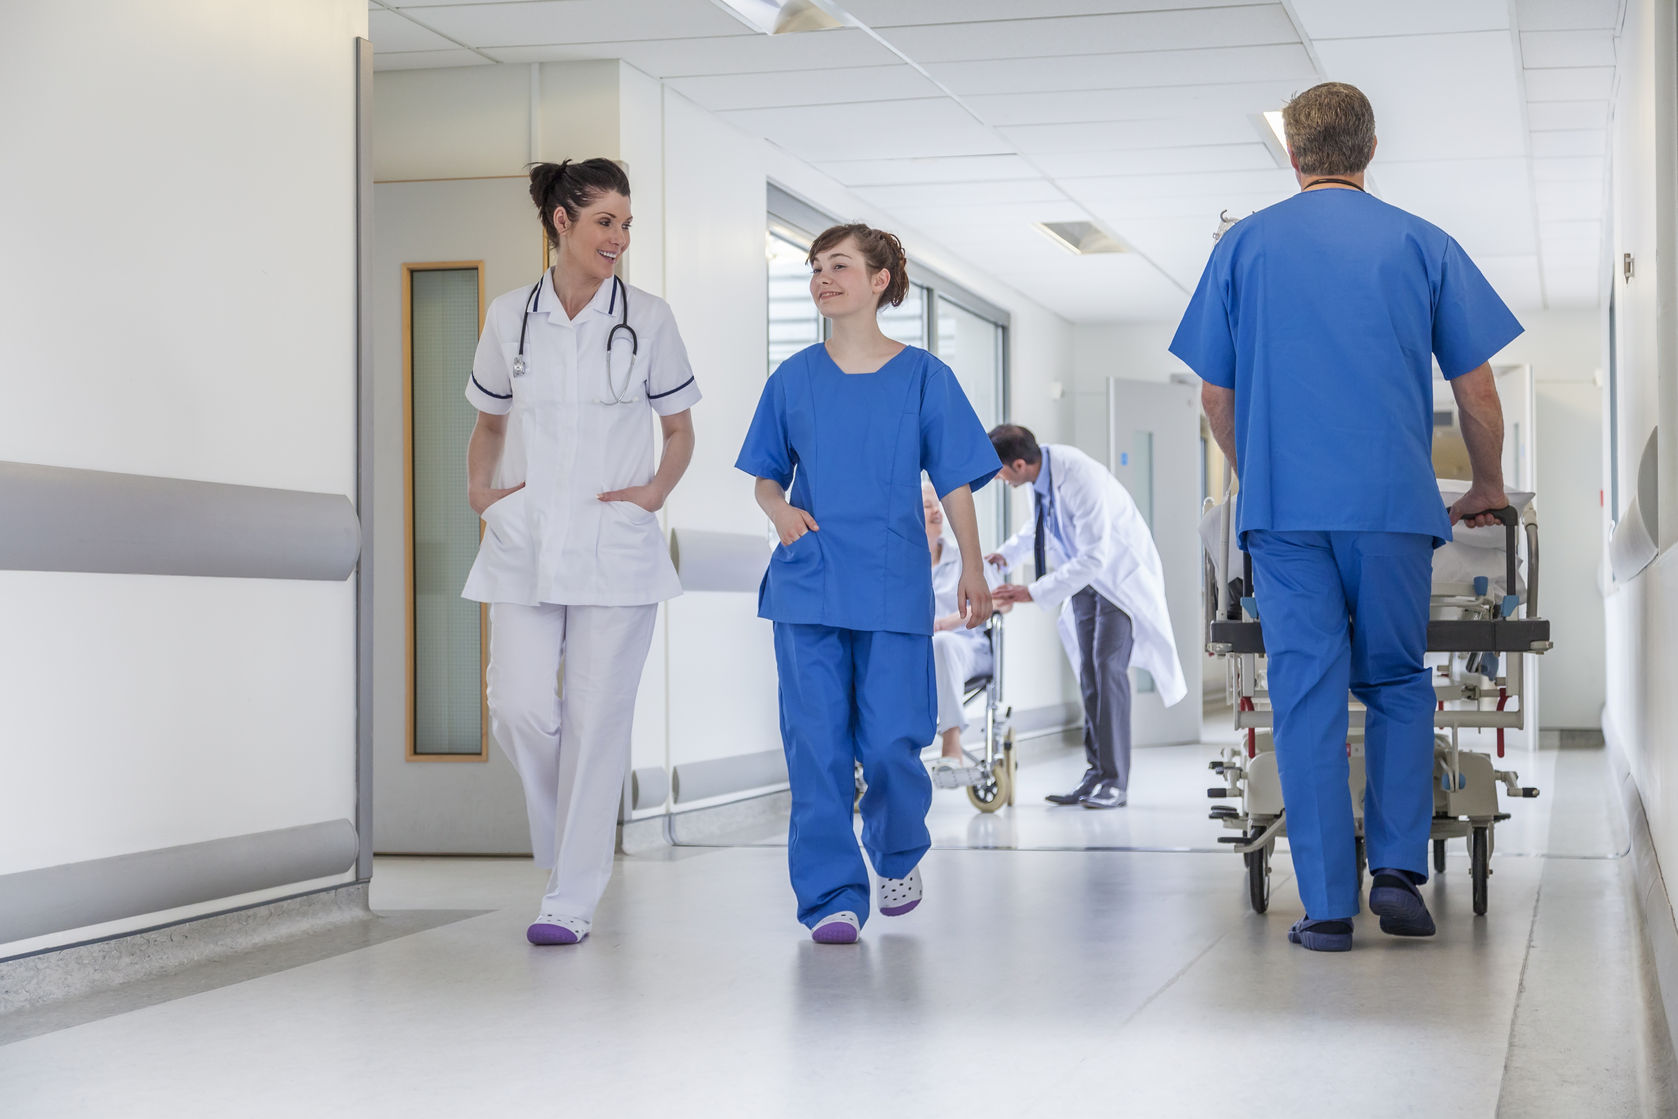 Agrippa fire door holders prove  the perfect prescription at leading hospital